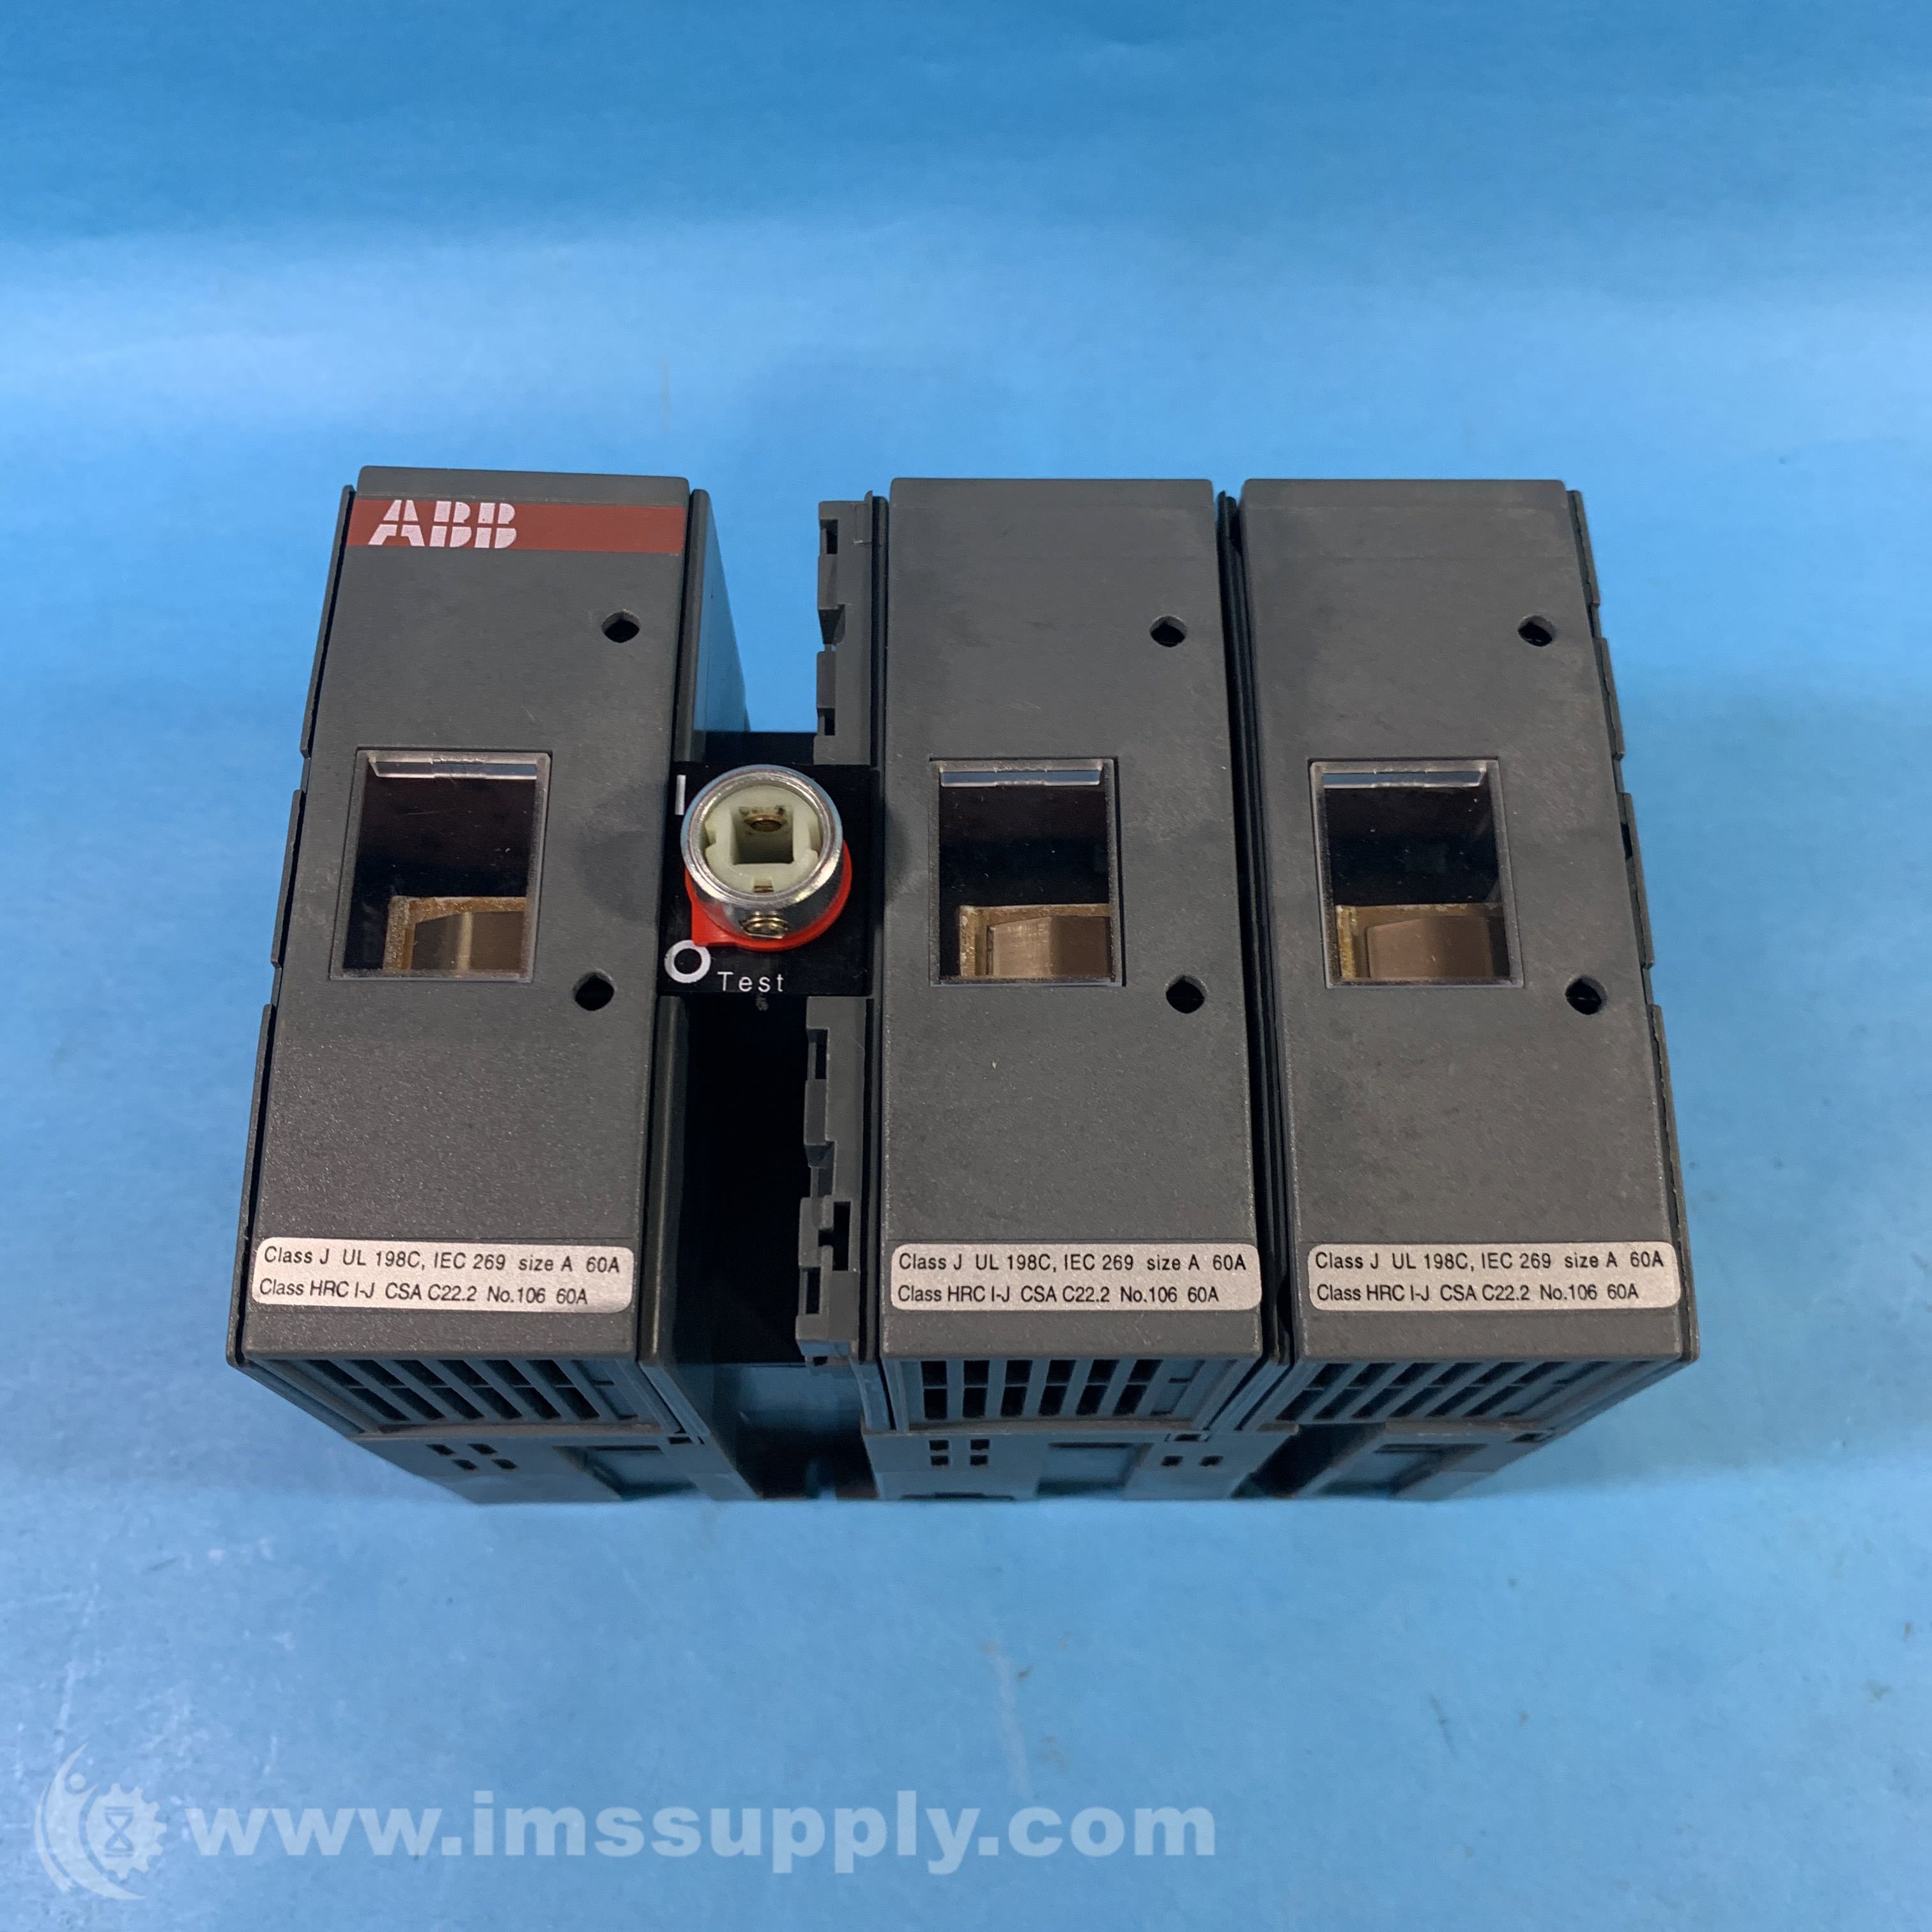 R1S6.6 Details about   ABB OS60J12 DISCONNECT SWITCH W/ X3 AJT60 60A FUSES